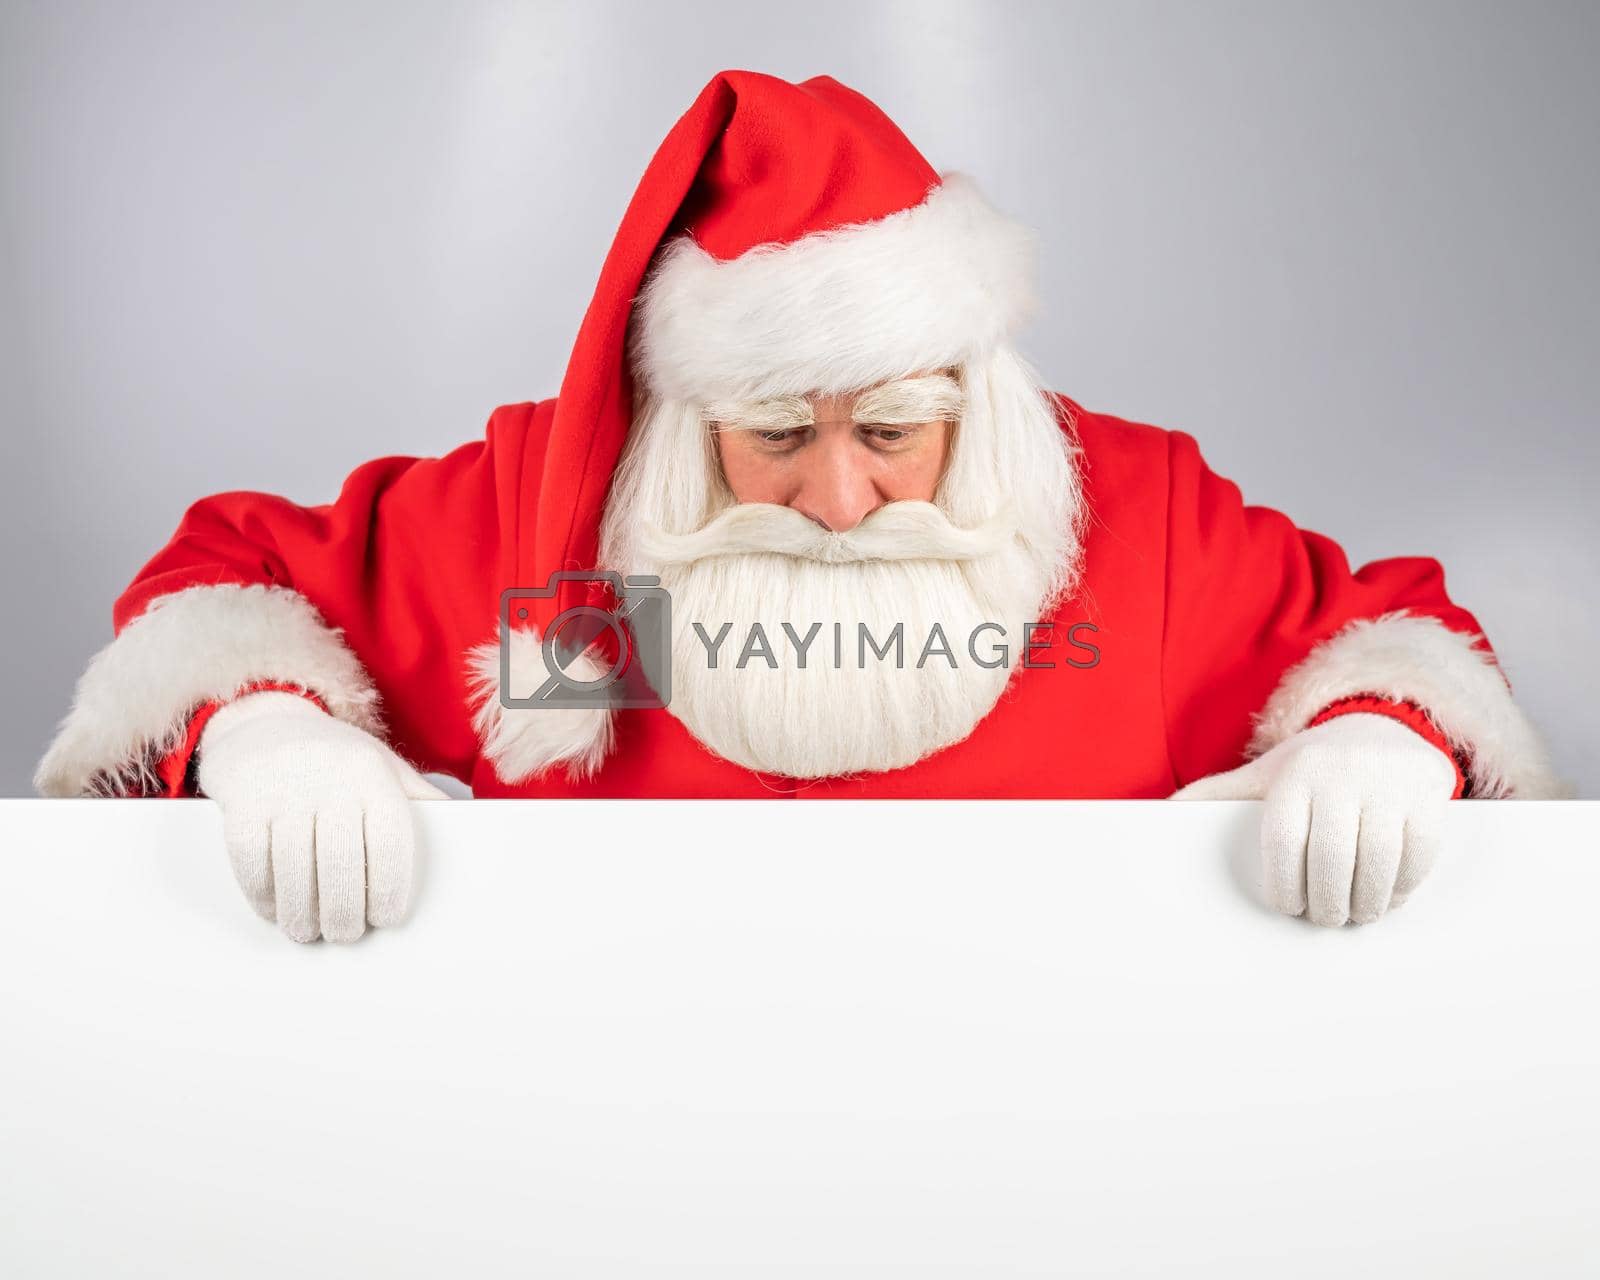 Royalty free image of Santa Claus peeks out from behind an ad on a white background. Merry Christmas. by mrwed54